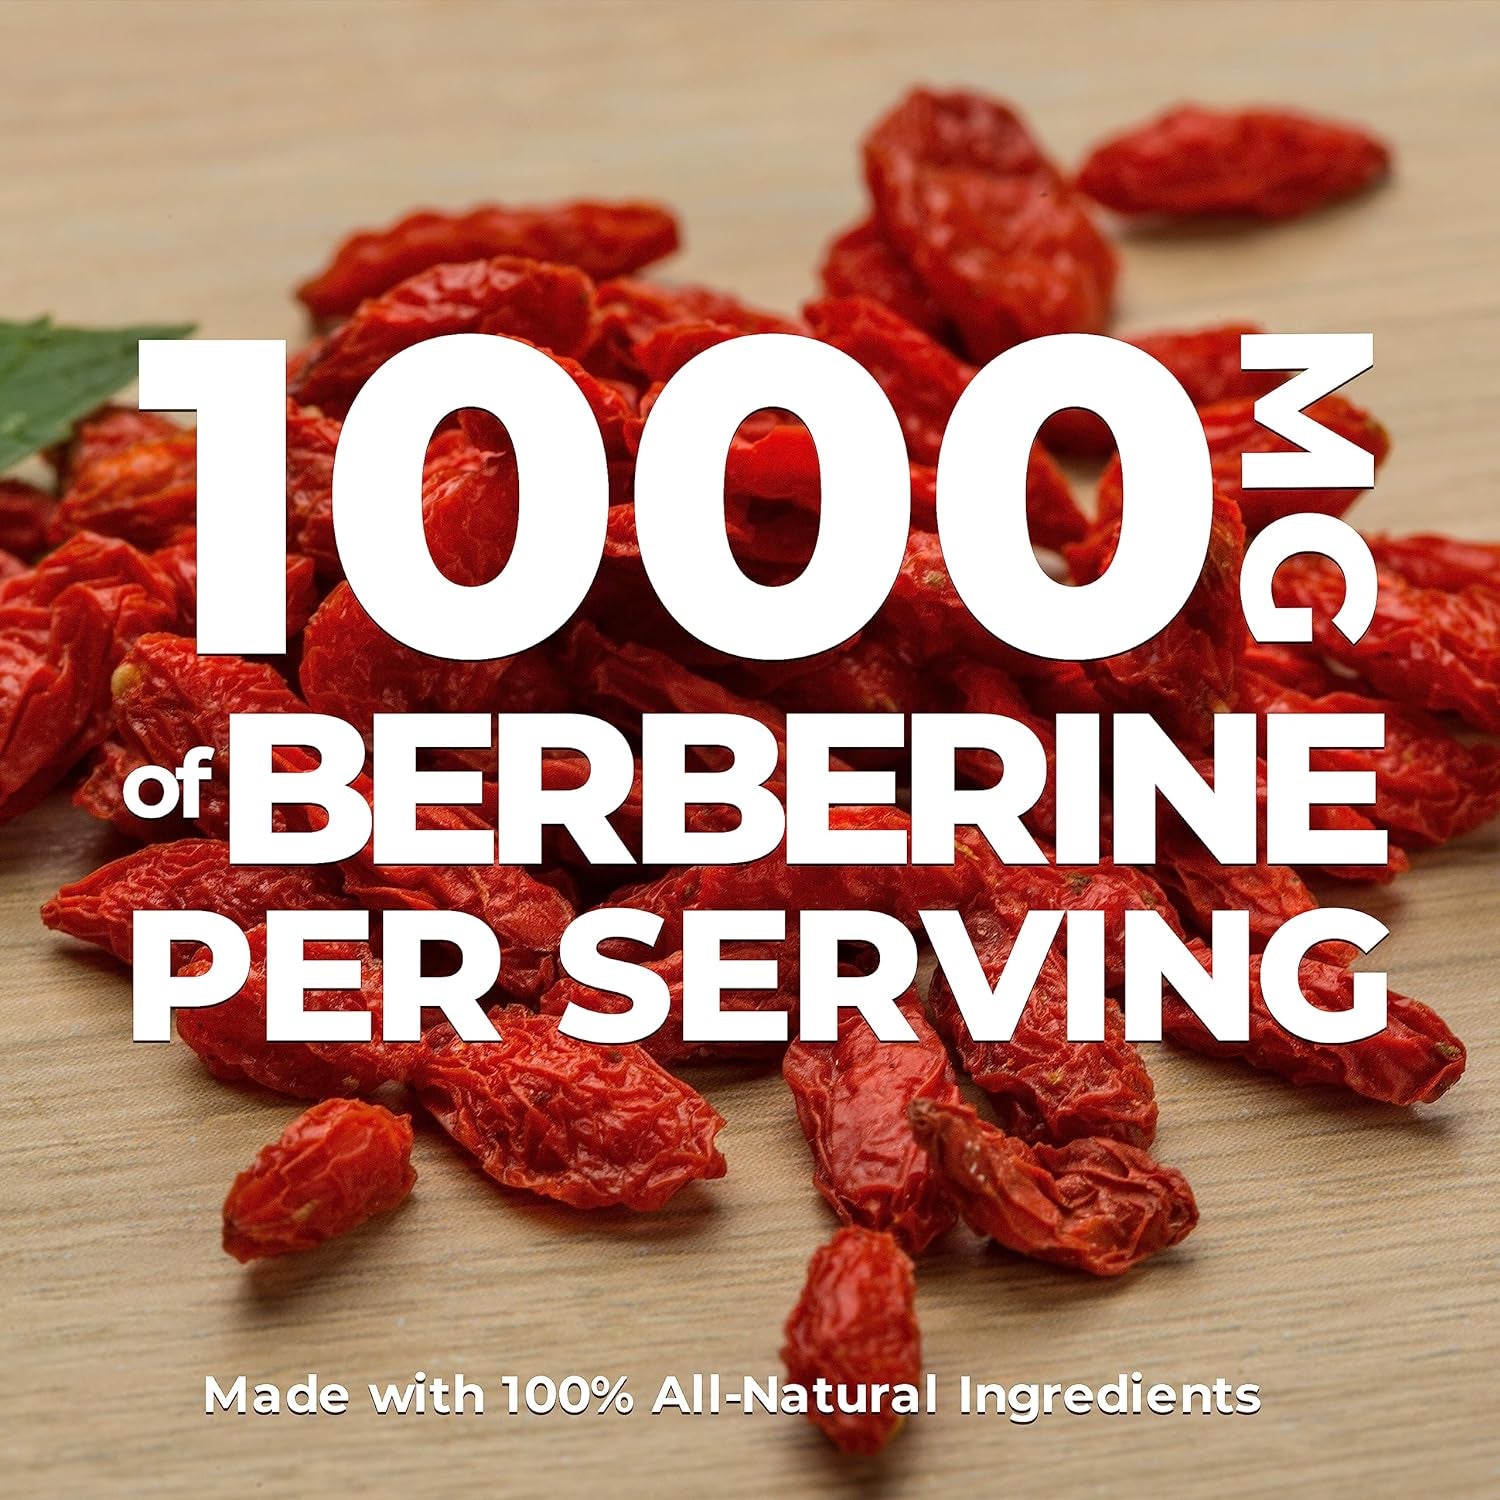 New Berberine MAXIMUM POTENCY 1000Mg per Serving (2 Capsules 500Mg Each) Supports Blood Sugar Levels, Healthy Lipid (Fat) and Glucose Metabolism. Non-Gmo, Vegan, Gluten Free. 90 Easy to Swallow Capsules